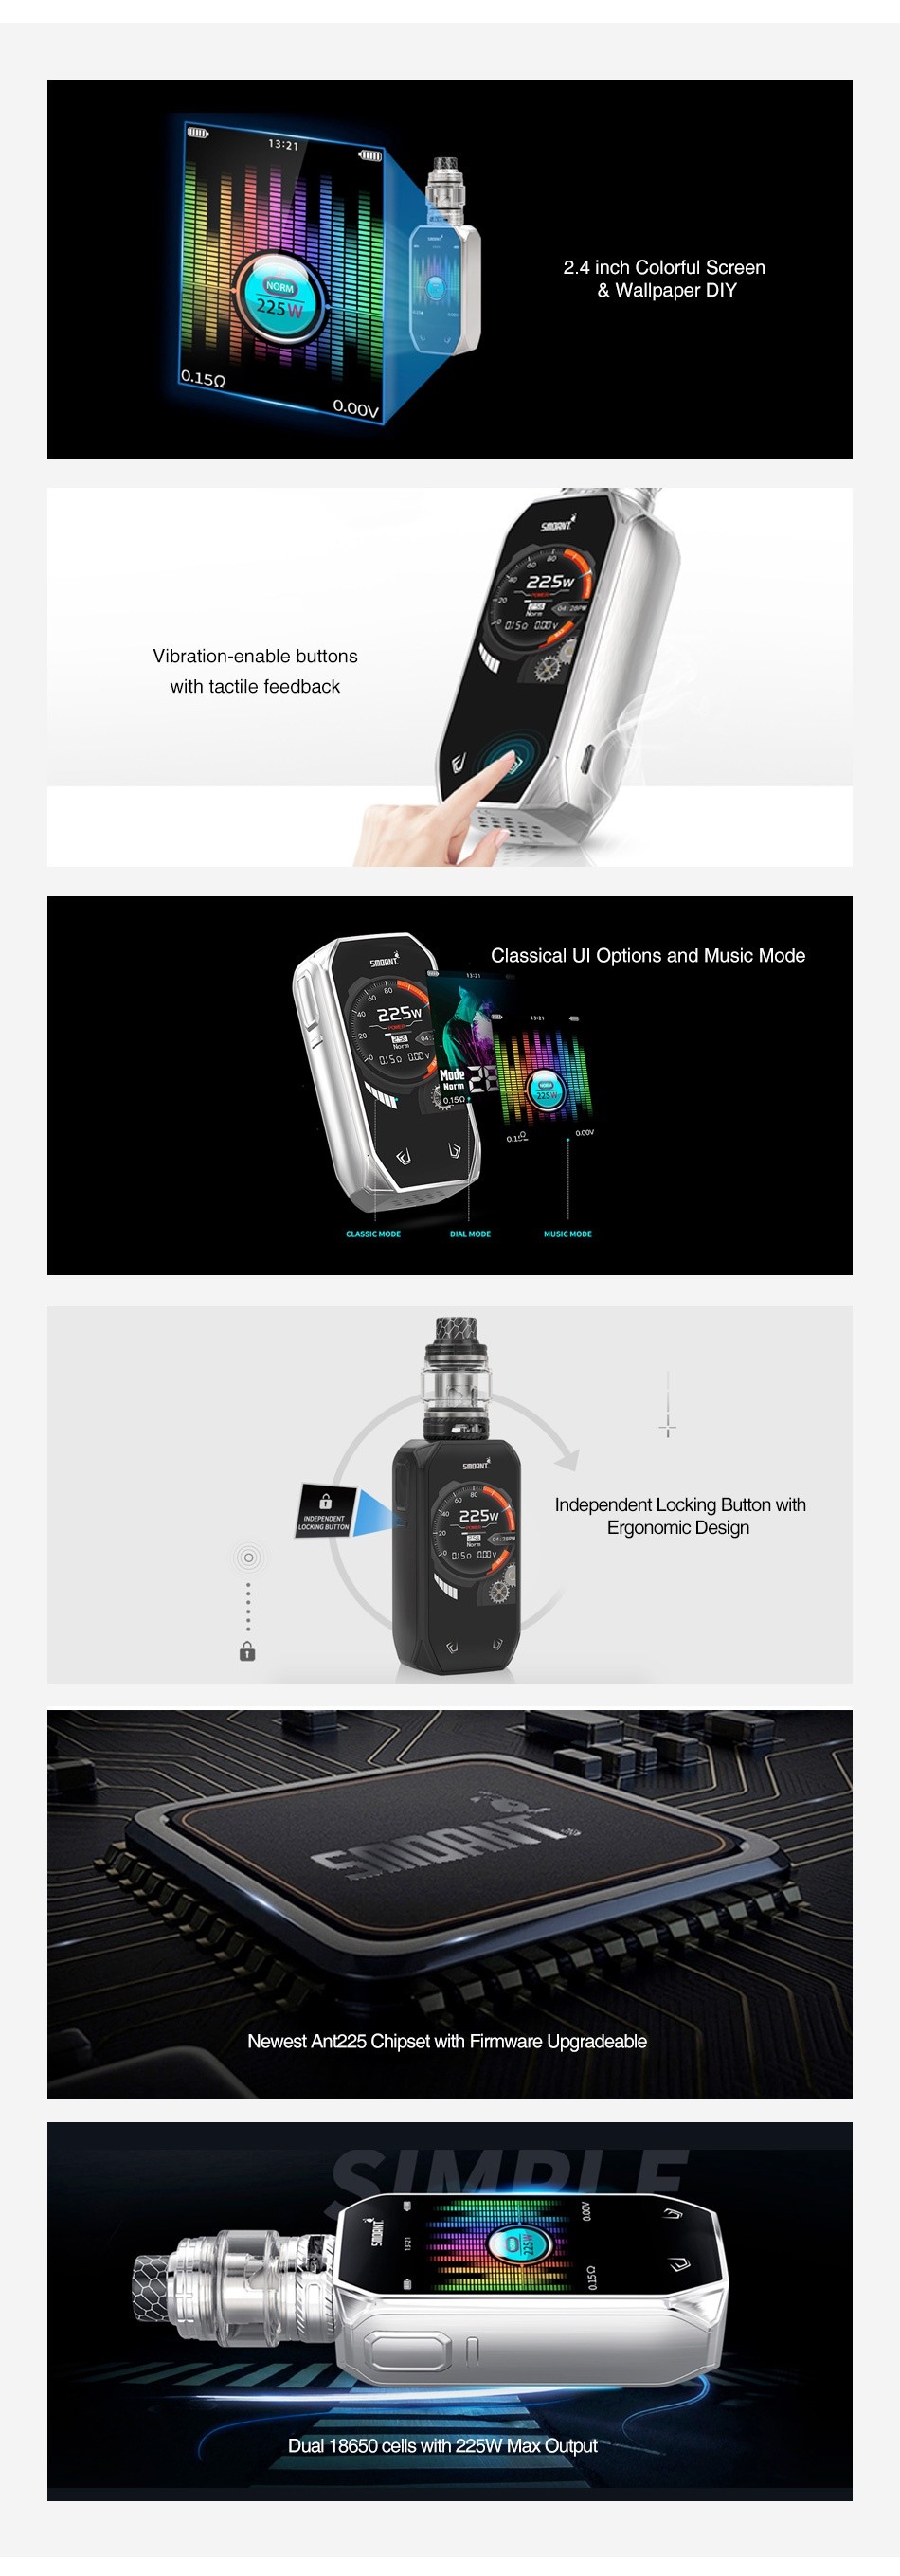 Smoant Naboo 225W TC Box MOD 3 21 Wallpaper DIY 2s1 Vibration  enable buttons Classical Ul Options and Music Mode NJSa M0n Independent Locking Button with Ergonomic Design Newest An 225 Chipset with Firmware Upgradeable Dual 18650 cells with 225W Max output